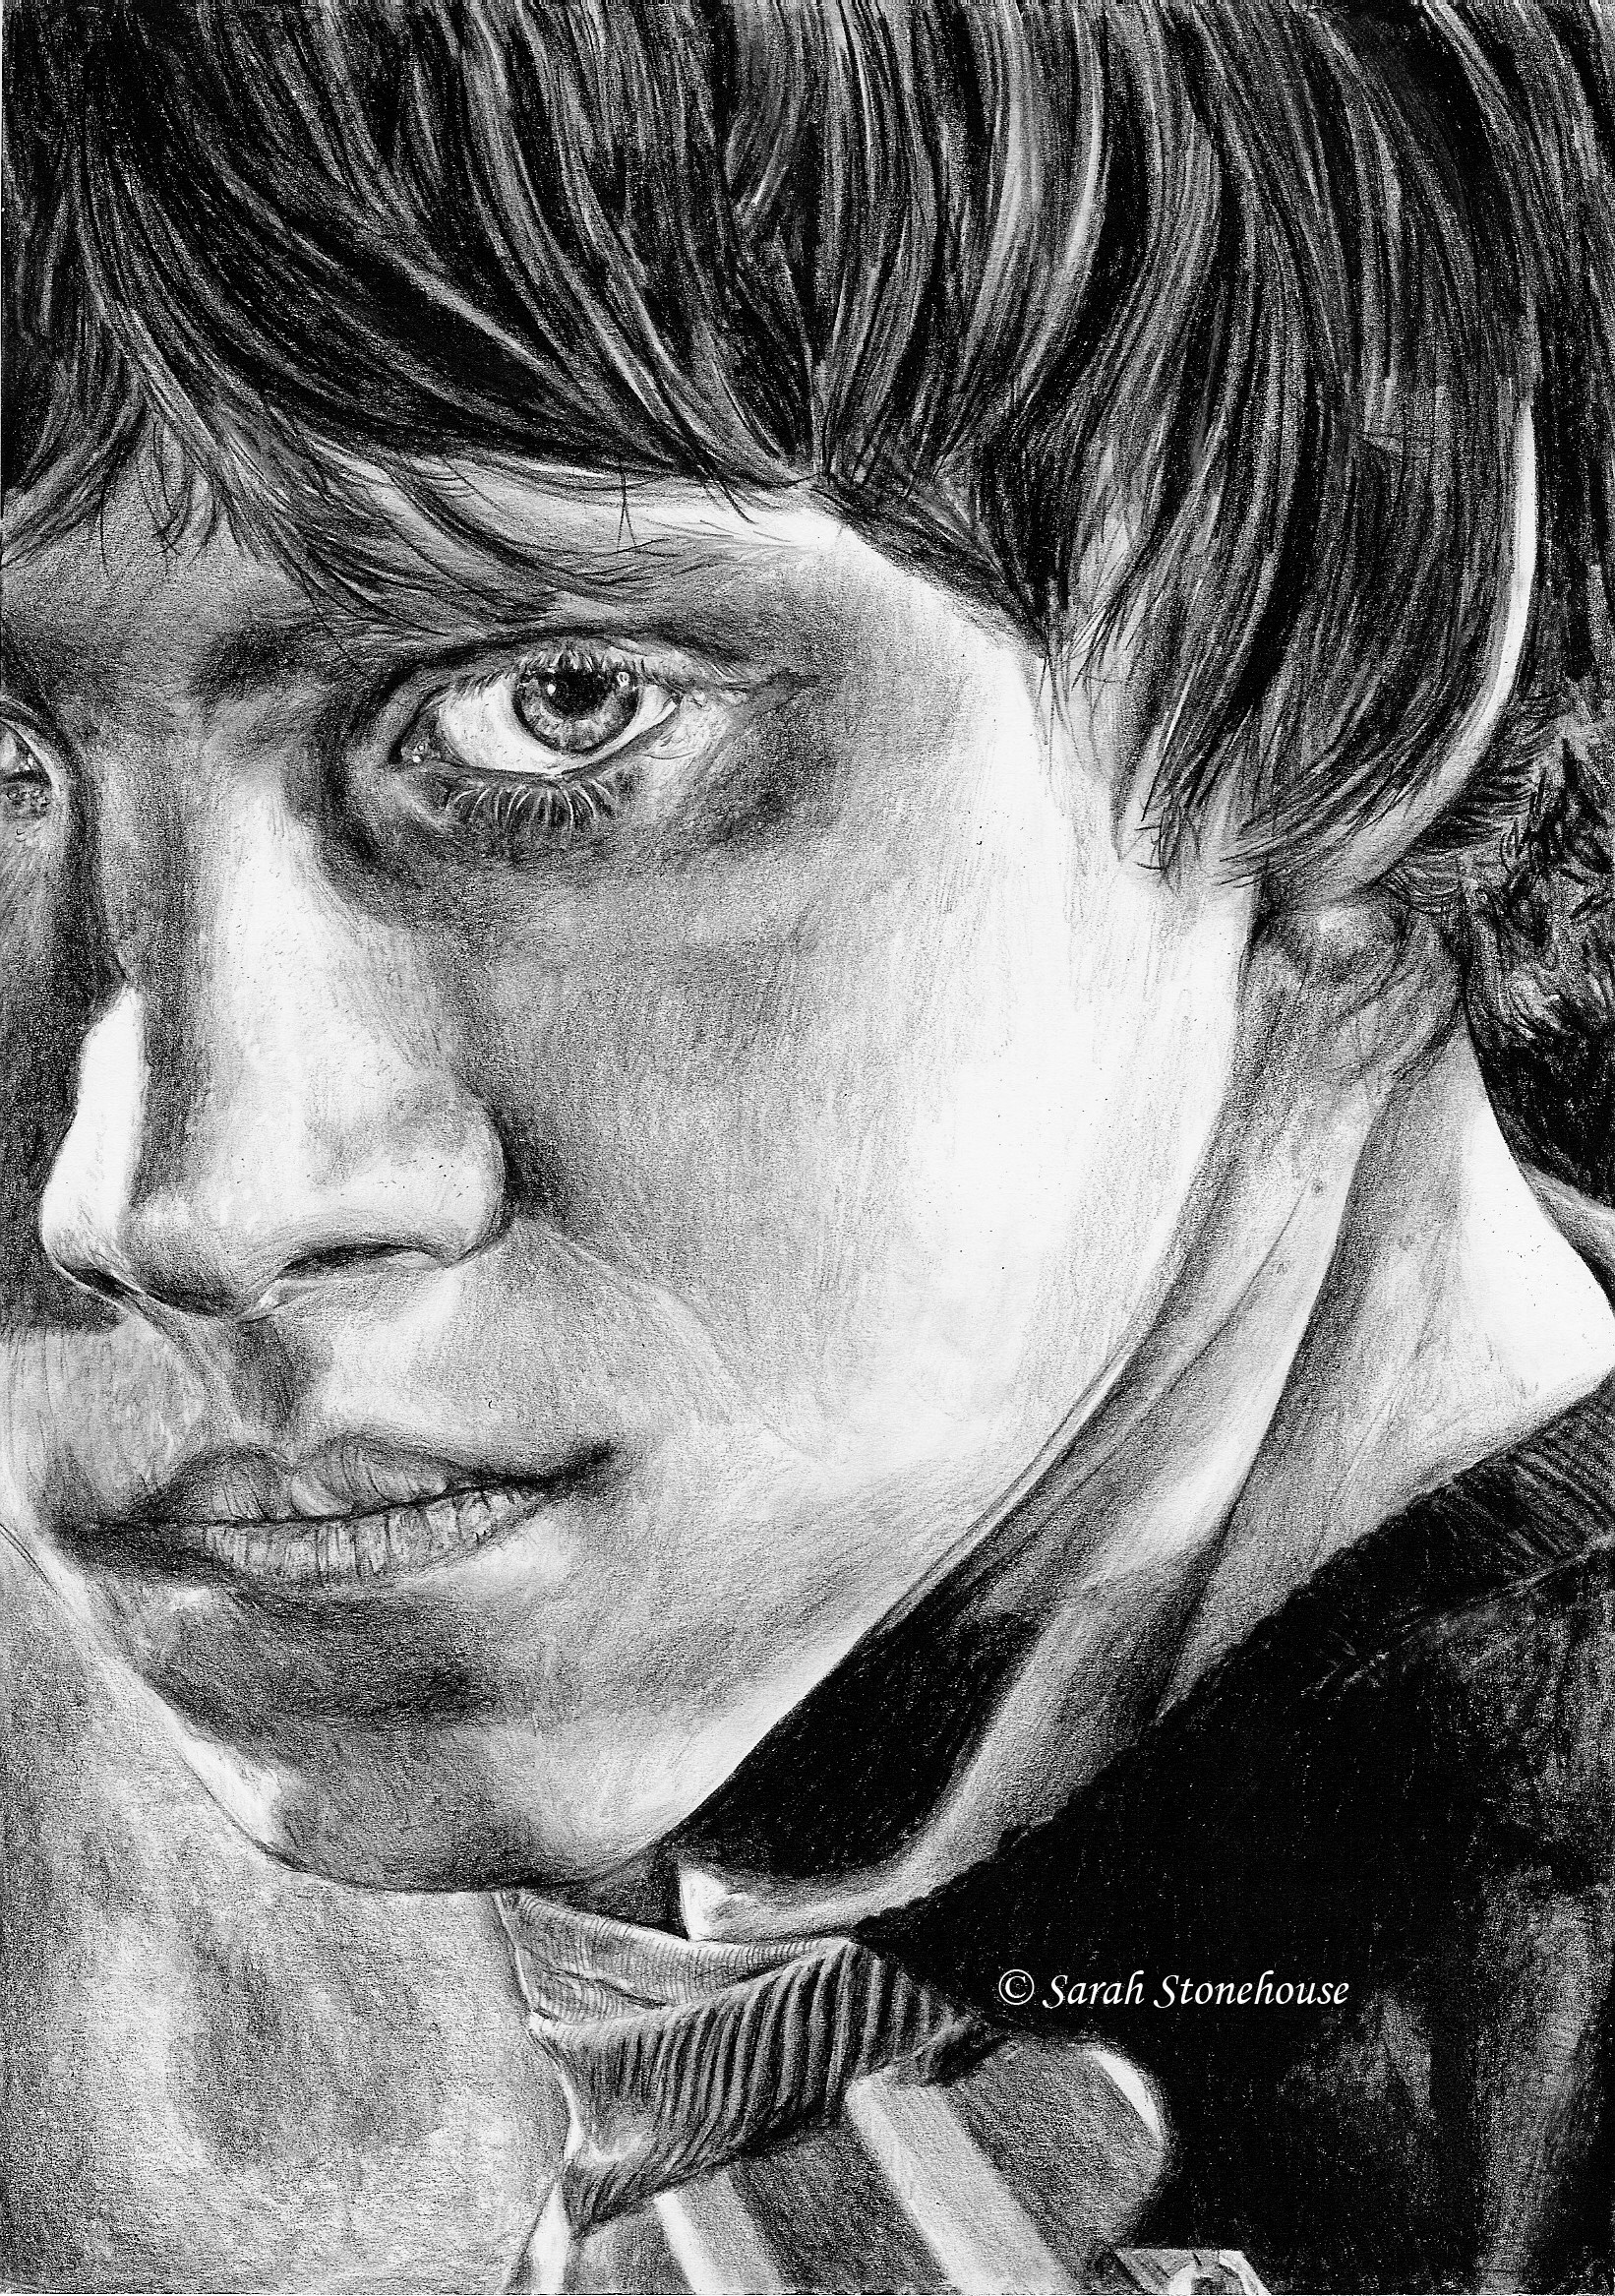 Learn How to Draw Ron Weasley from Harry Potter Harry Potter Step by Step   Drawing Tutorials